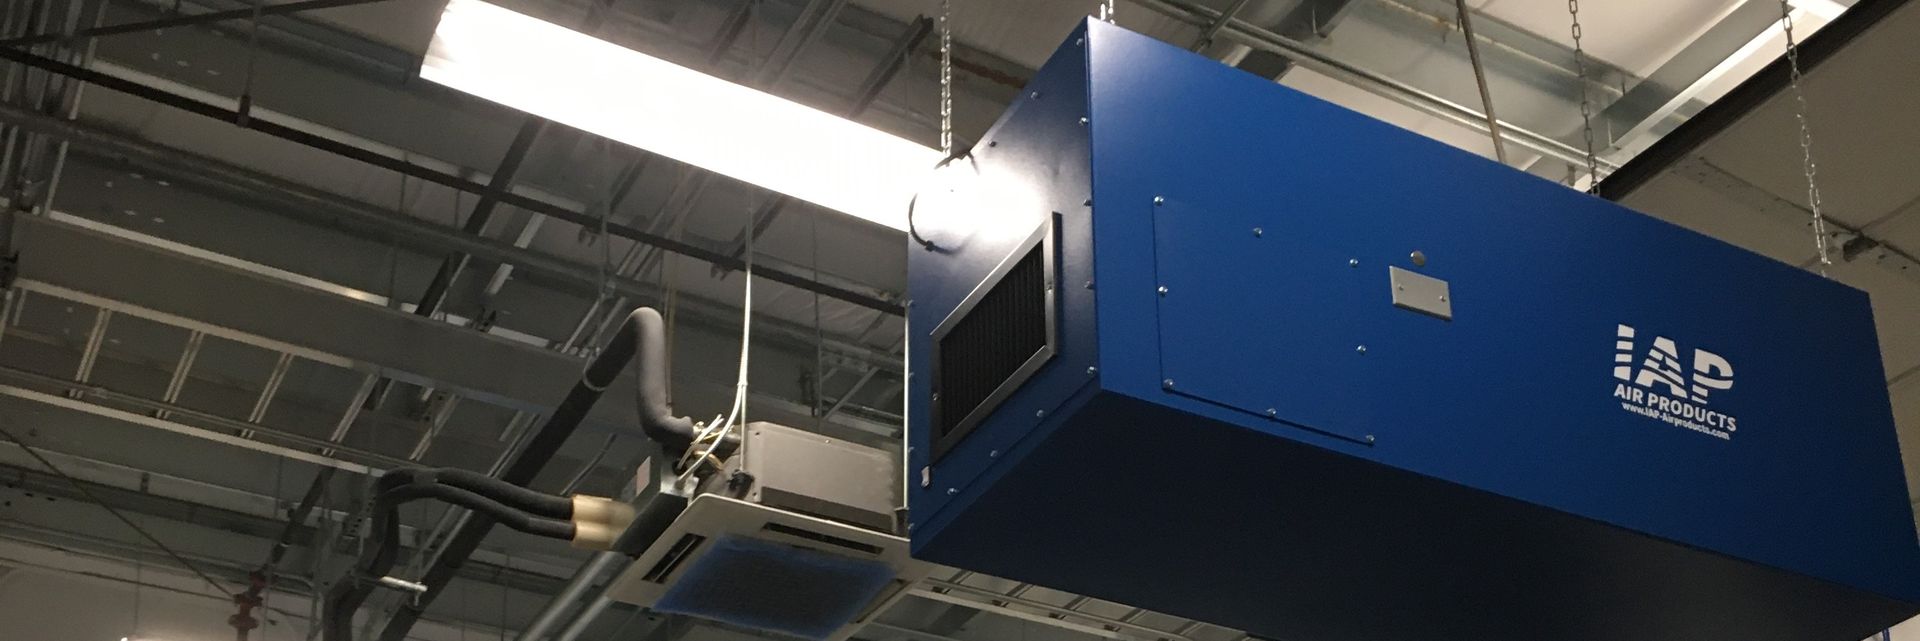 Ambient Air Cleaners used for effective fume extraction